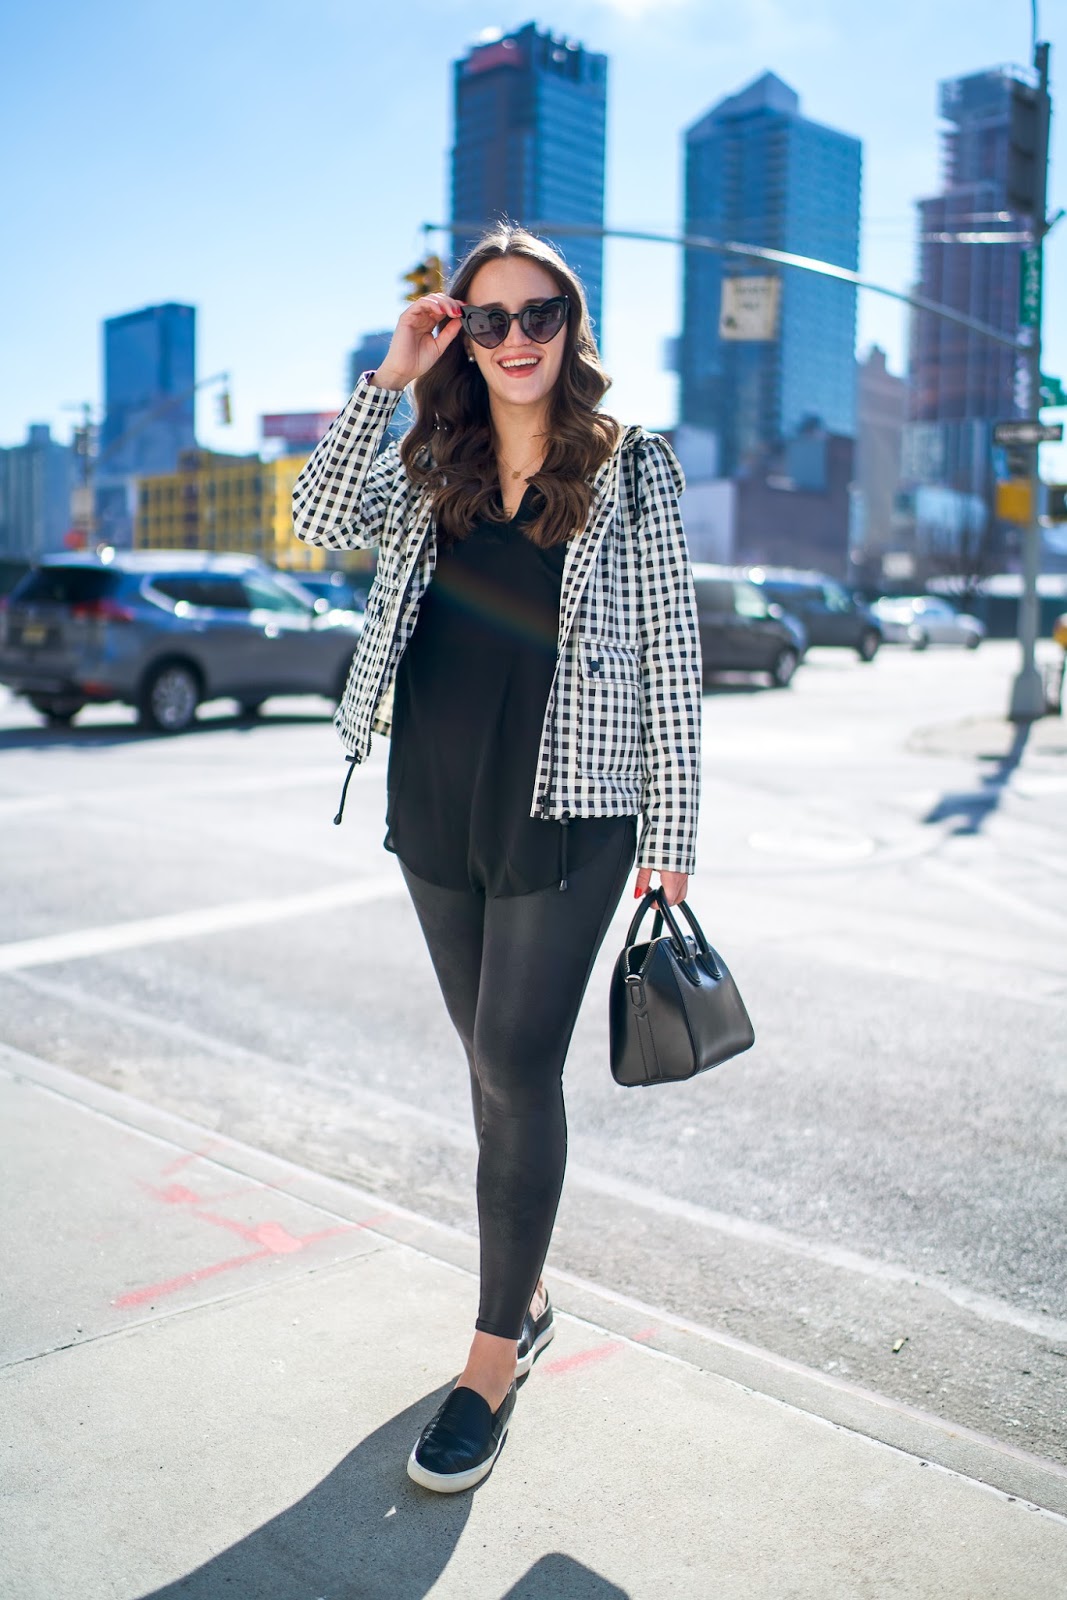 My Favorite Transition to Spring Fashion by popular New York fashion blogger Covering the Bases